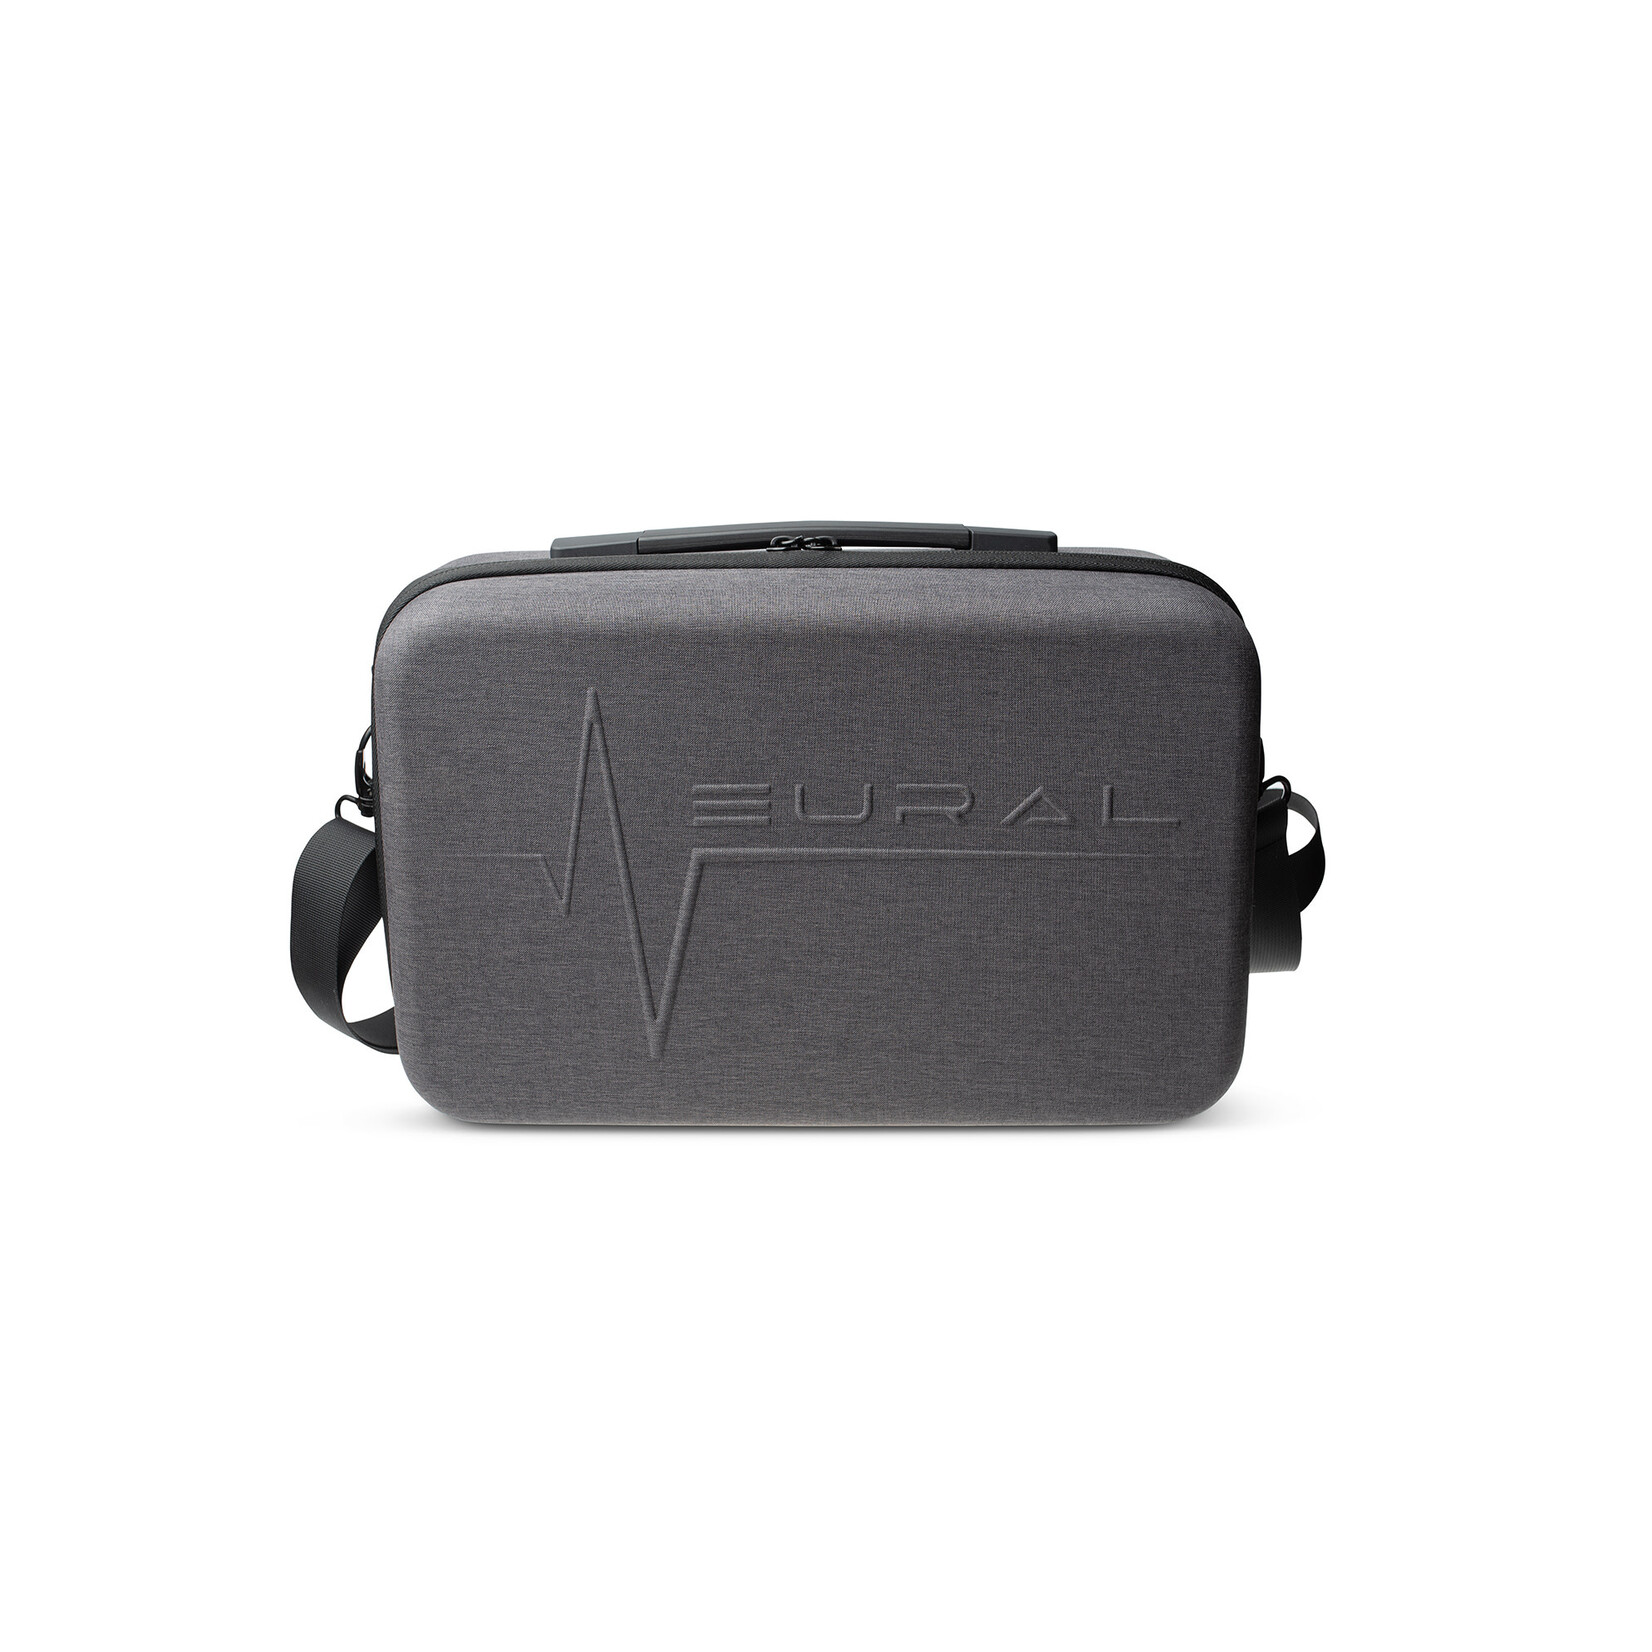 Neural DSP Neural DSP GigCase, Molded & Padded Case for Quad Cortex